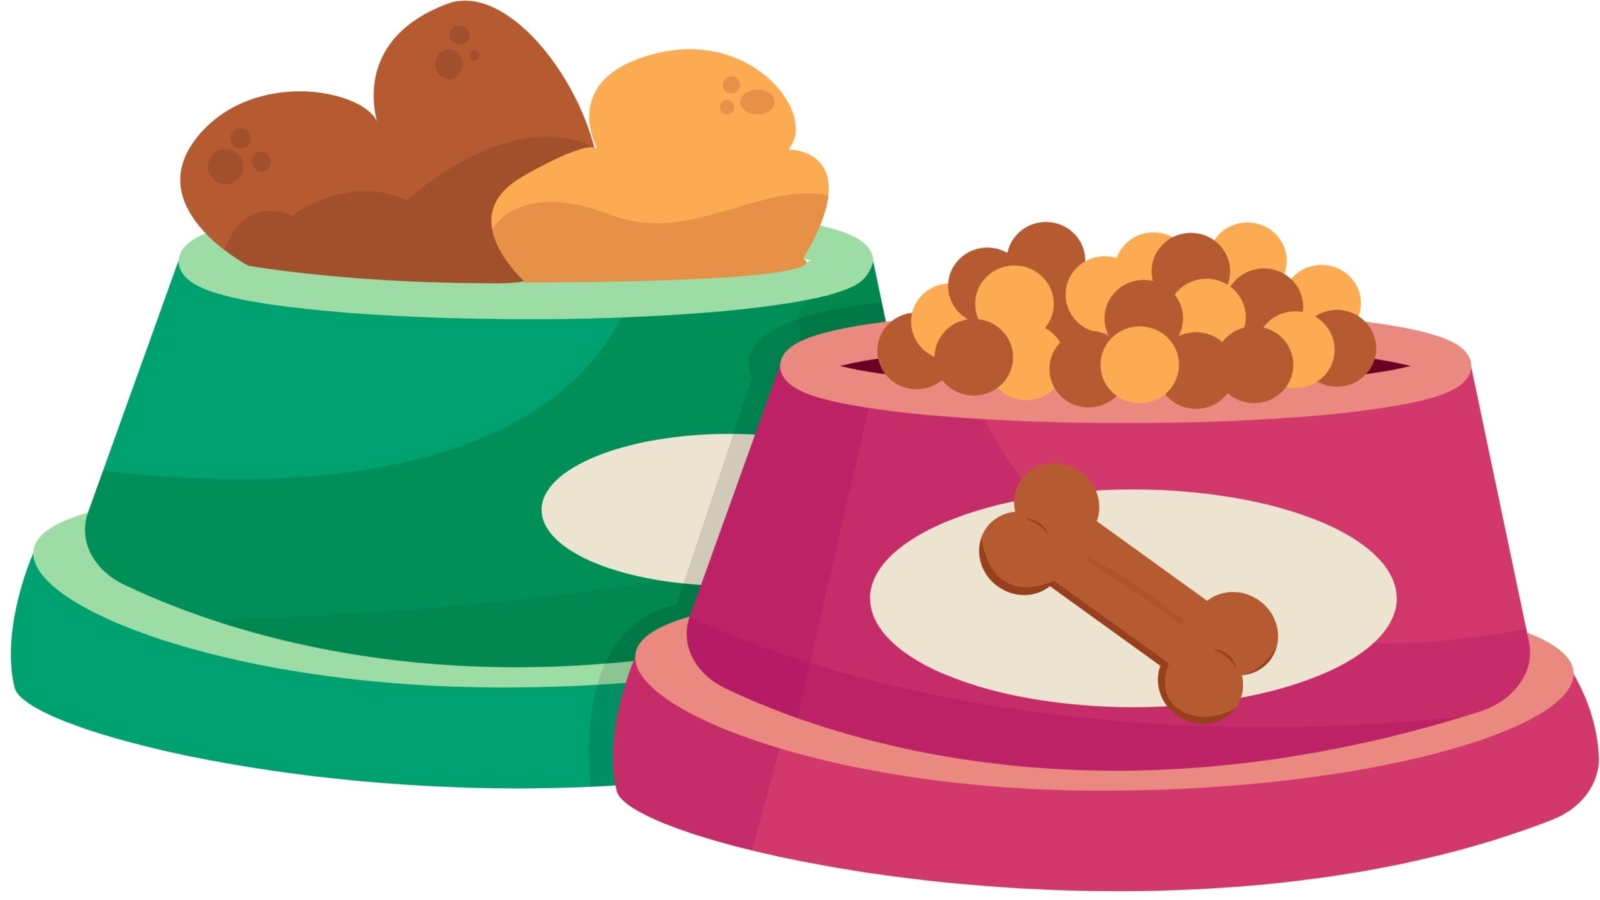 A comprehensive guide to choosing the best pet food for your pets.